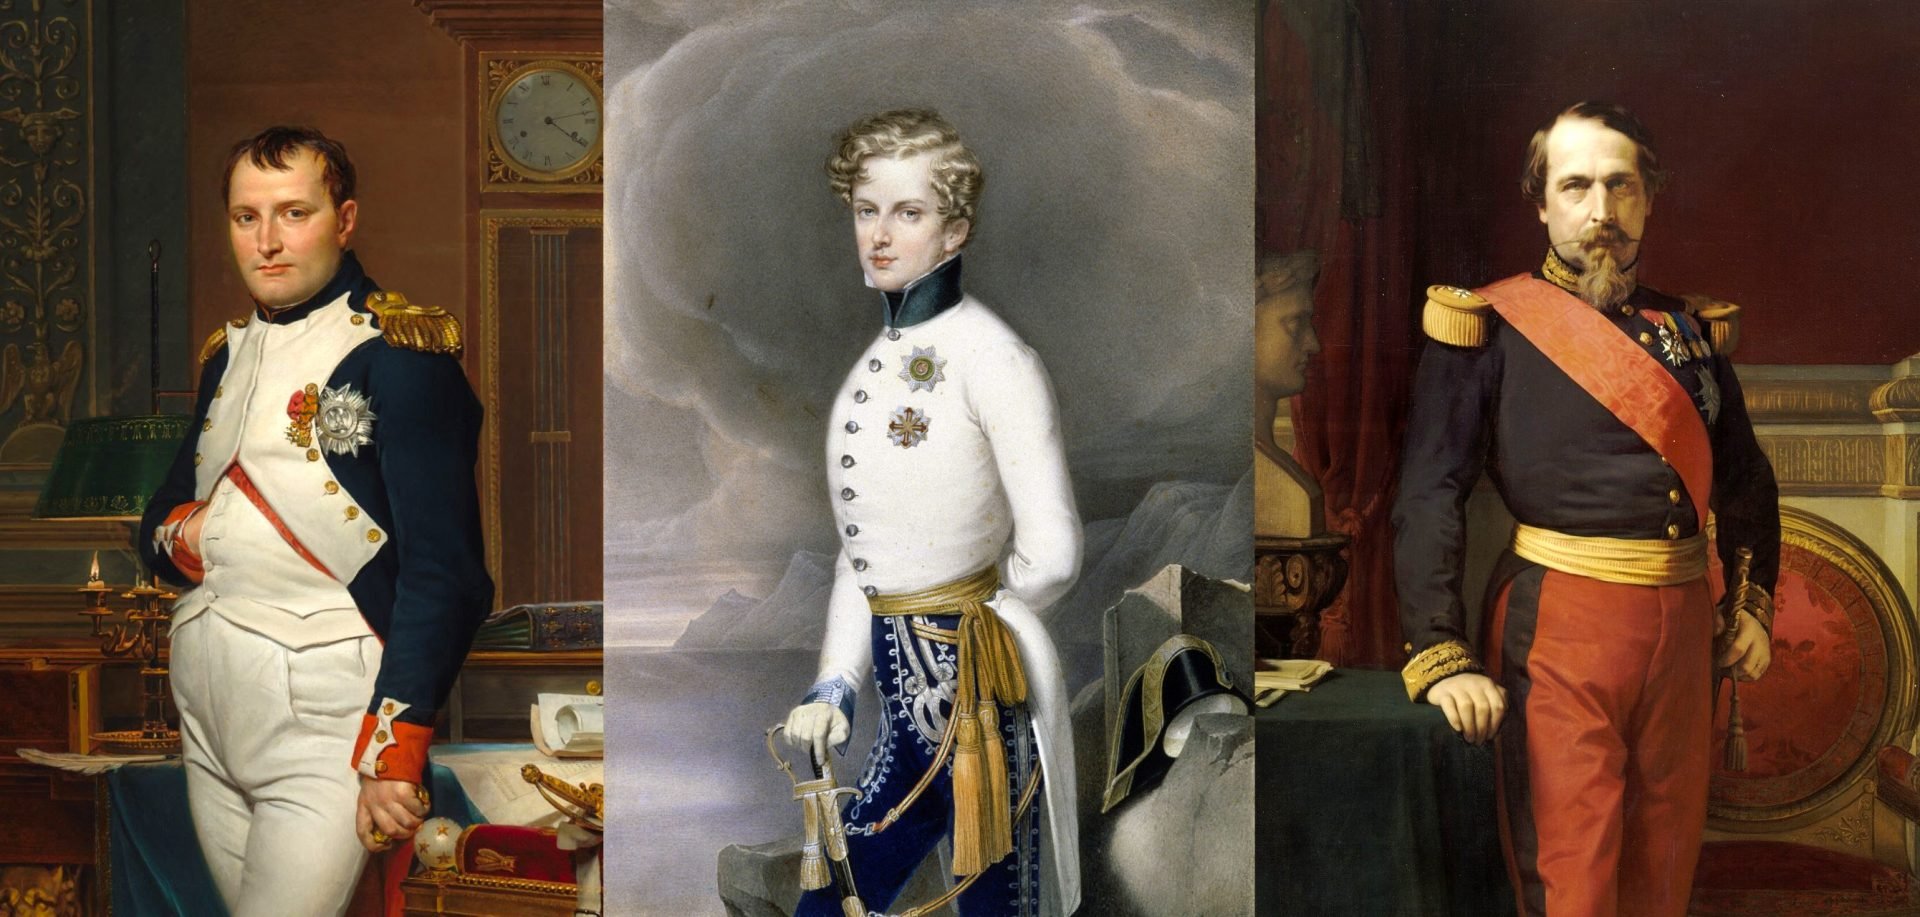 Triptych of three portraits showcasing European leaders: On the left, Napoleon Bonaparte stands confidently in a lavish room, adorned in his blue military uniform with gold embellishments and displaying medals. In the center, a young Napoleon II is portrayed against a stormy backdrop, dressed in a white military uniform with a medallion on his chest. On the right, Napoleon III is depicted in an opulent setting, wearing a deep blue and red military uniform with gold accents and various decorations.